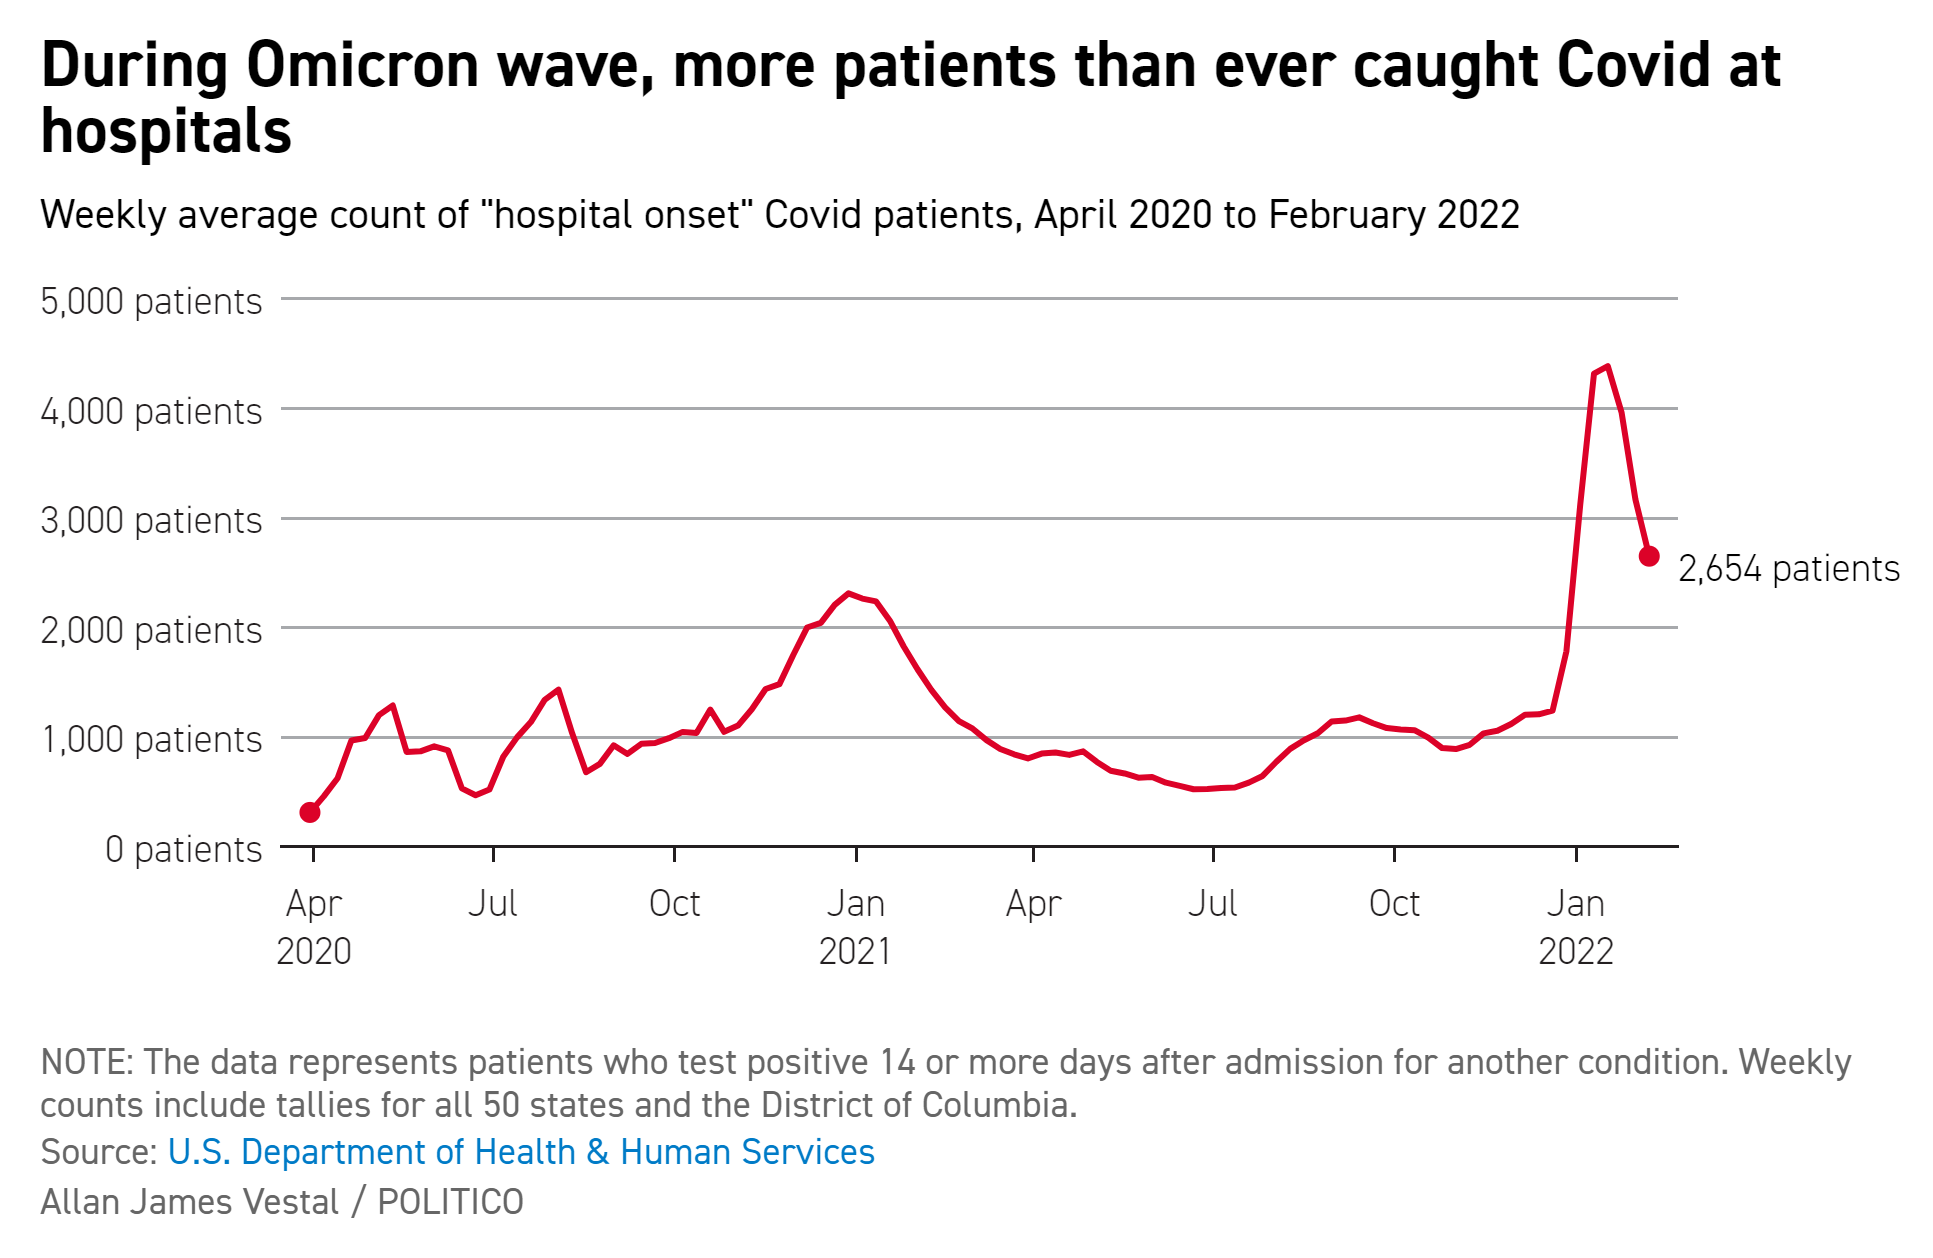 Weekly average count of “hospital onset” COVID-19 patients in the United States, April 2020 - February 2022. During the Omicron wave, more patients than ever caught COVID-19 at hospitals (nosocomial infections). Data: U.S. Department of Health and Human Services. Graphic: Allan James Vestal / POLITICO